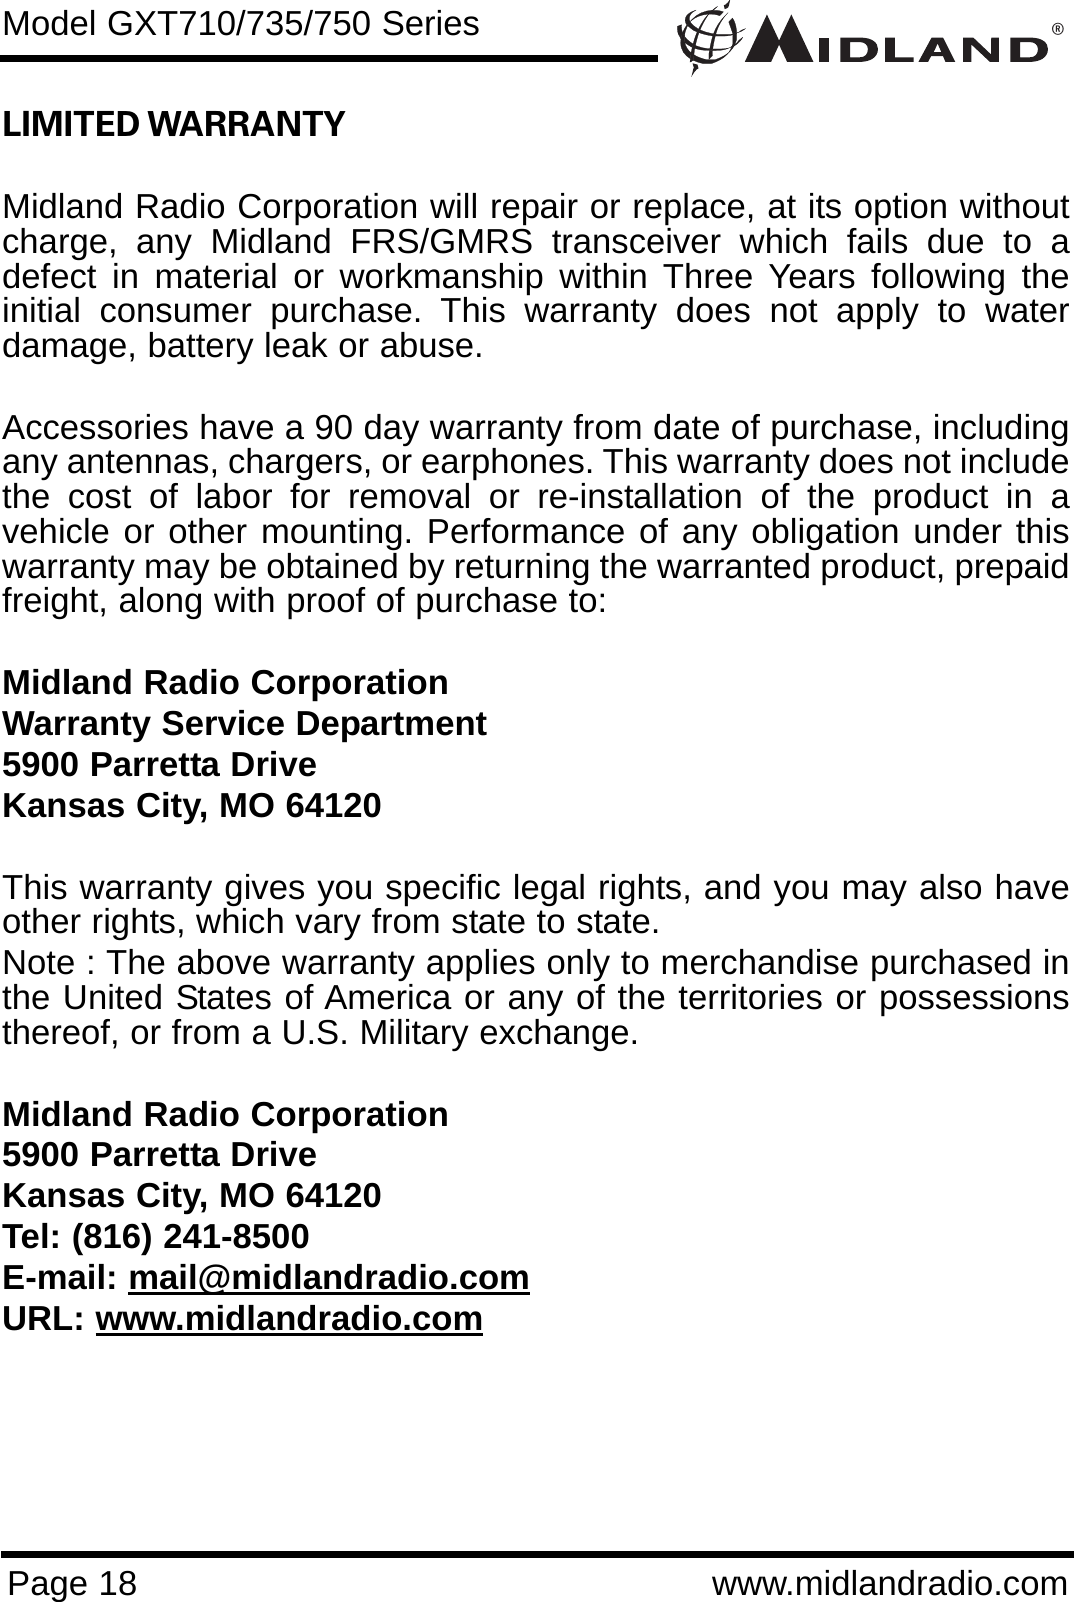 ®Page 18 www.midlandradio.comLIMITED WARRANTY Midland Radio Corporation will repair or replace, at its option withoutcharge, any Midland FRS/GMRS transceiver which fails due to adefect in material or workmanship within Three Years following theinitial consumer purchase. This warranty does not apply to waterdamage, battery leak or abuse.Accessories have a 90 day warranty from date of purchase, includingany antennas, chargers, or earphones. This warranty does not includethe cost of labor for removal or re-installation of the product in avehicle or other mounting. Performance of any obligation under thiswarranty may be obtained by returning the warranted product, prepaidfreight, along with proof of purchase to:Midland Radio CorporationWarranty Service Department5900 Parretta DriveKansas City, MO 64120This warranty gives you specific legal rights, and you may also haveother rights, which vary from state to state.Note : The above warranty applies only to merchandise purchased inthe United States of America or any of the territories or possessionsthereof, or from a U.S. Military exchange.Midland Radio Corporation5900 Parretta DriveKansas City, MO 64120Tel: (816) 241-8500E-mail: mail@midlandradio.comURL: www.midlandradio.comModel GXT710/735/750 Series